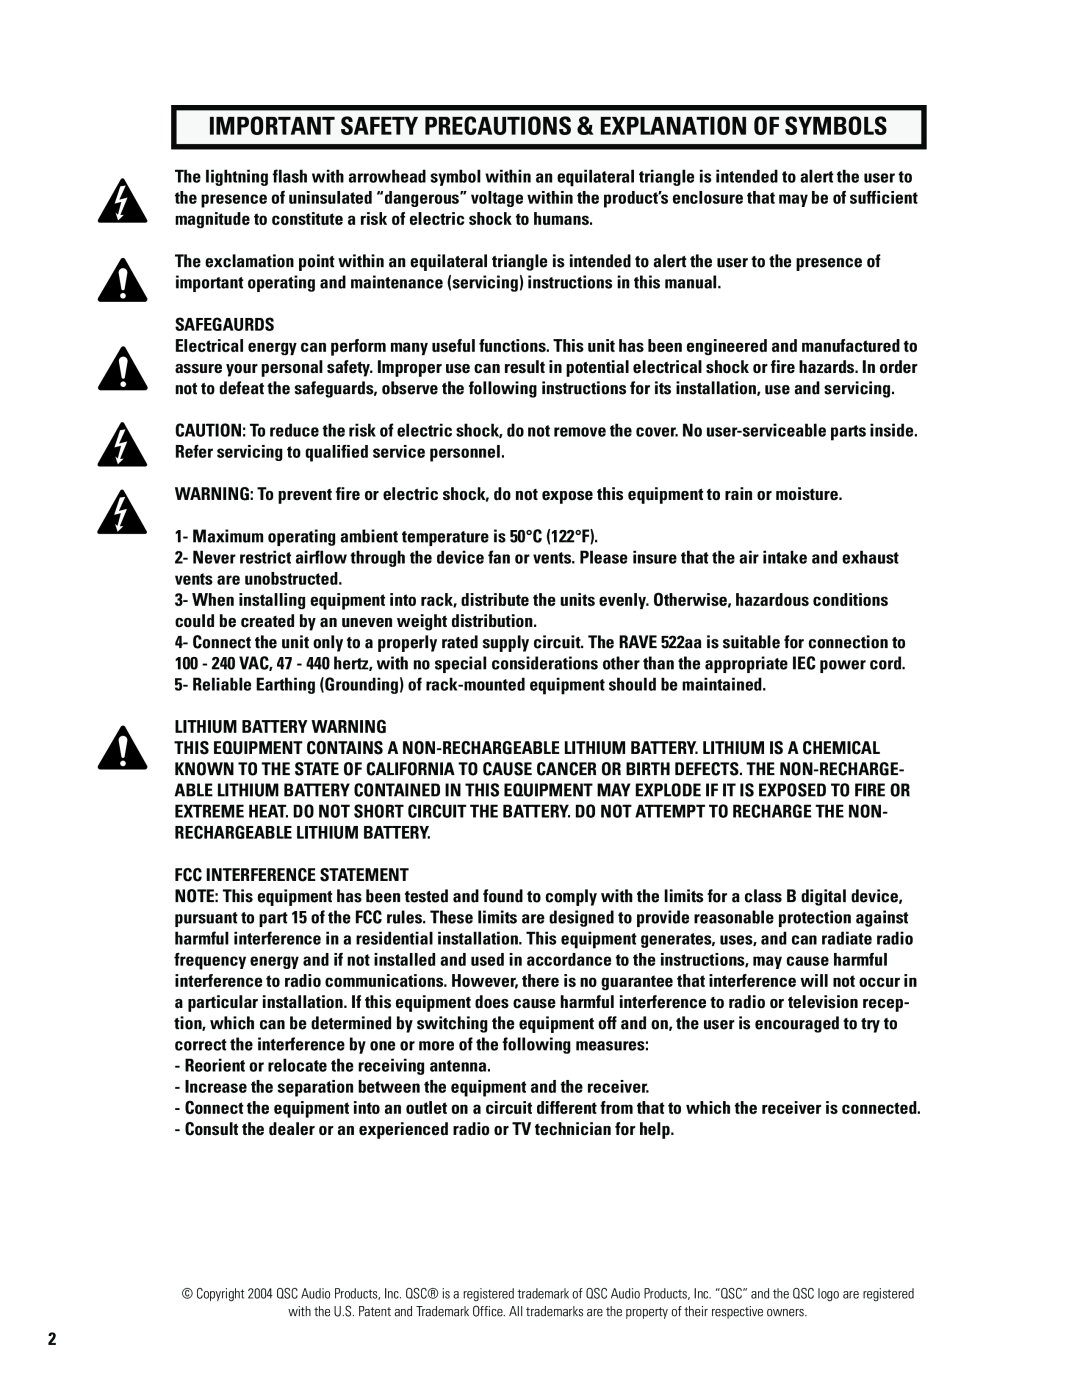 QSC Audio 522AA manual Safegaurds, Lithium Battery Warning, Fcc Interference Statement 